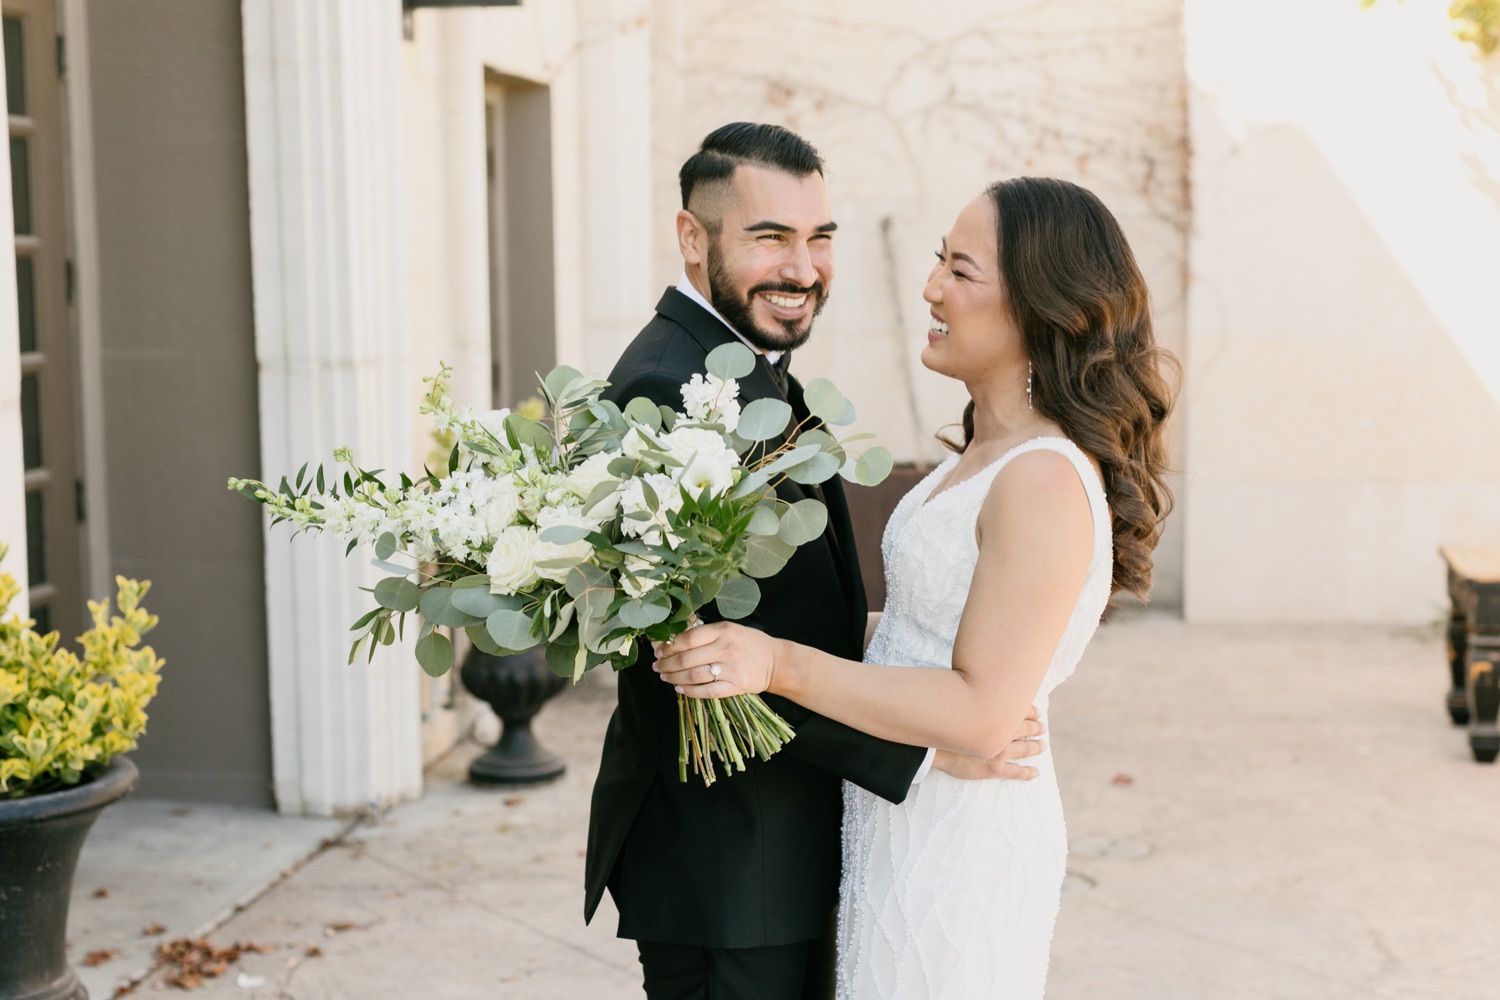 Bride and groom at their first look at Tooth and nail winery in Paso Robles, California by Tayler Enerle Photography